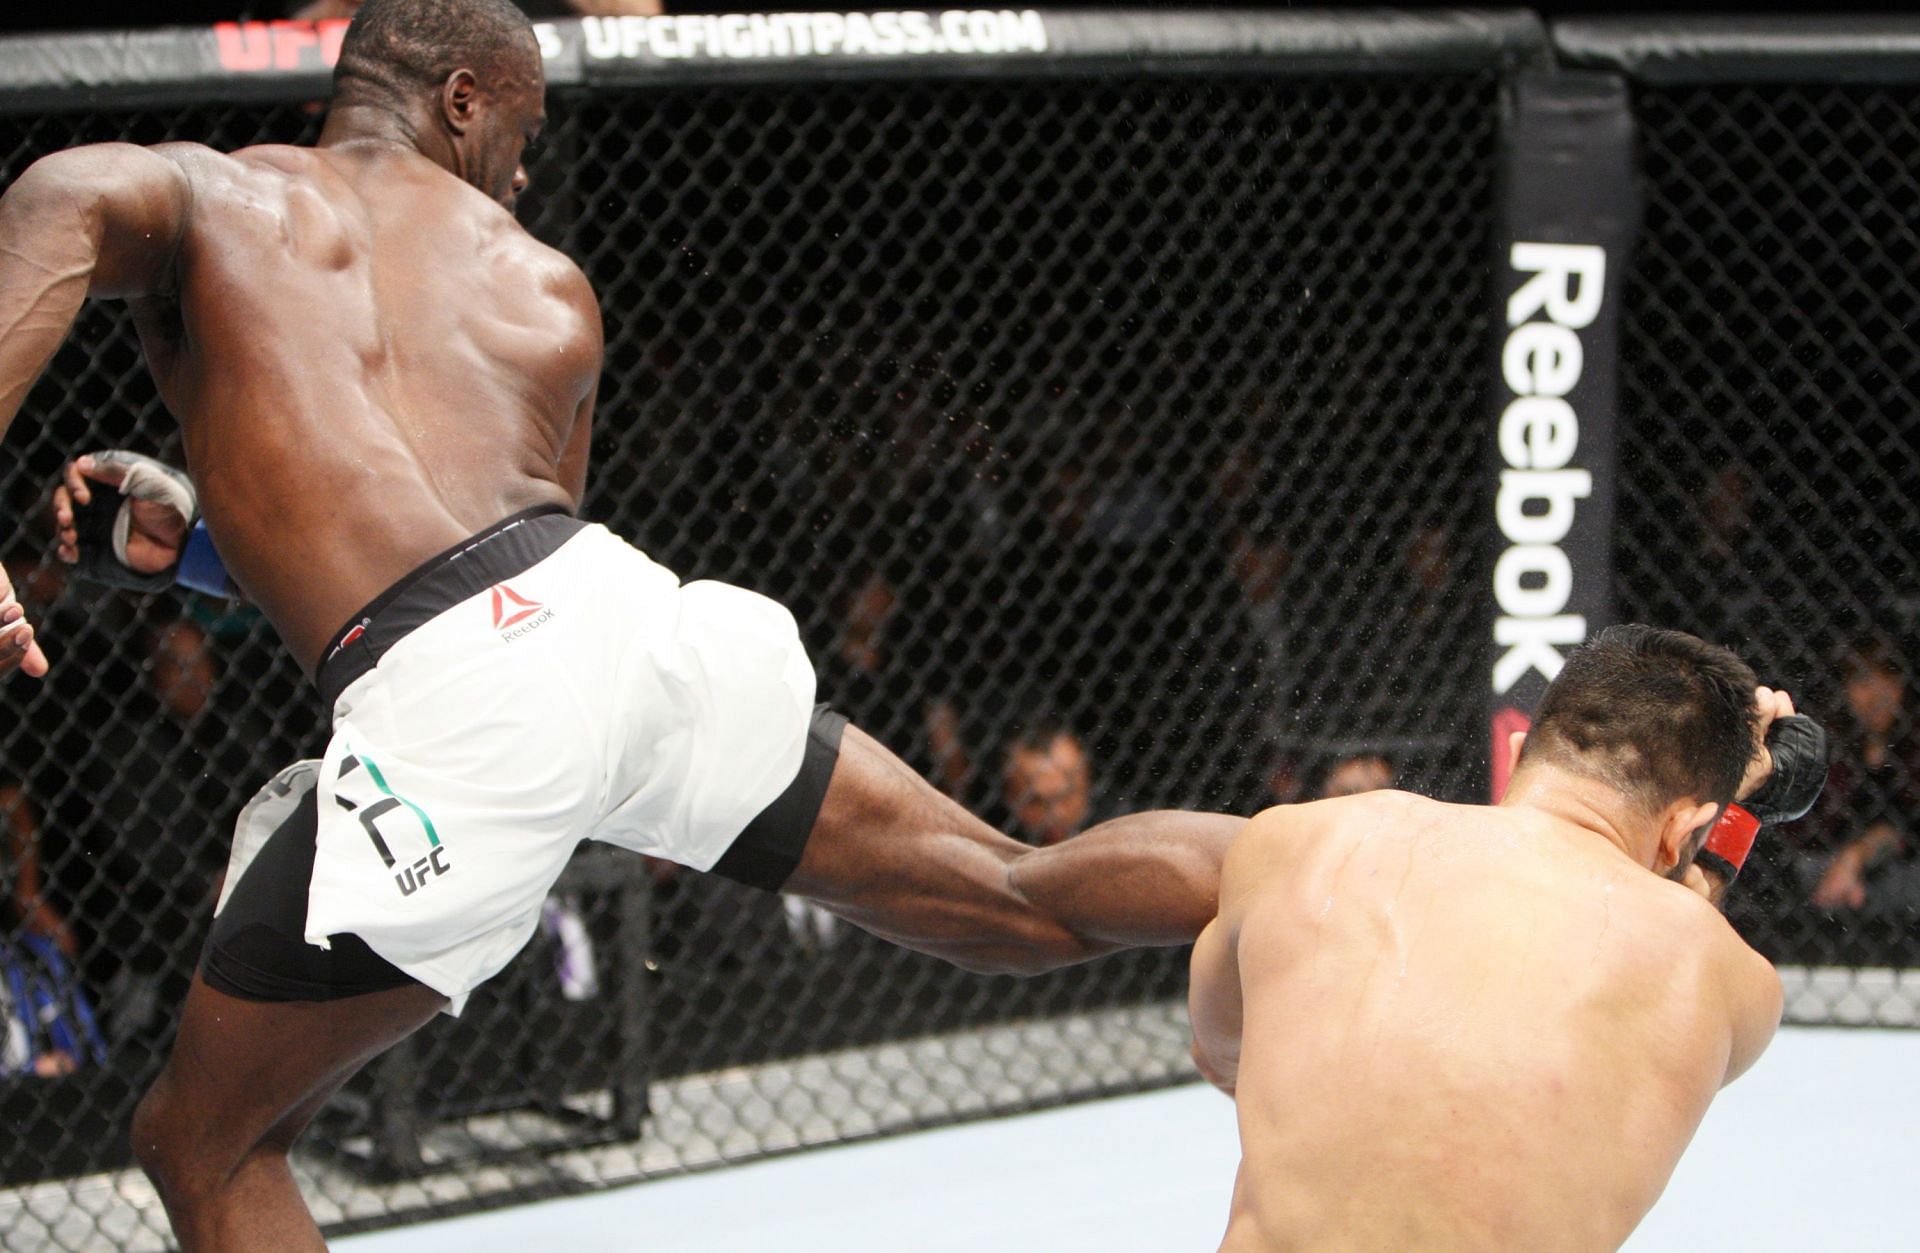 Uriah Hall channelled his favourite video game characters in his wild win over Gegard Mousasi